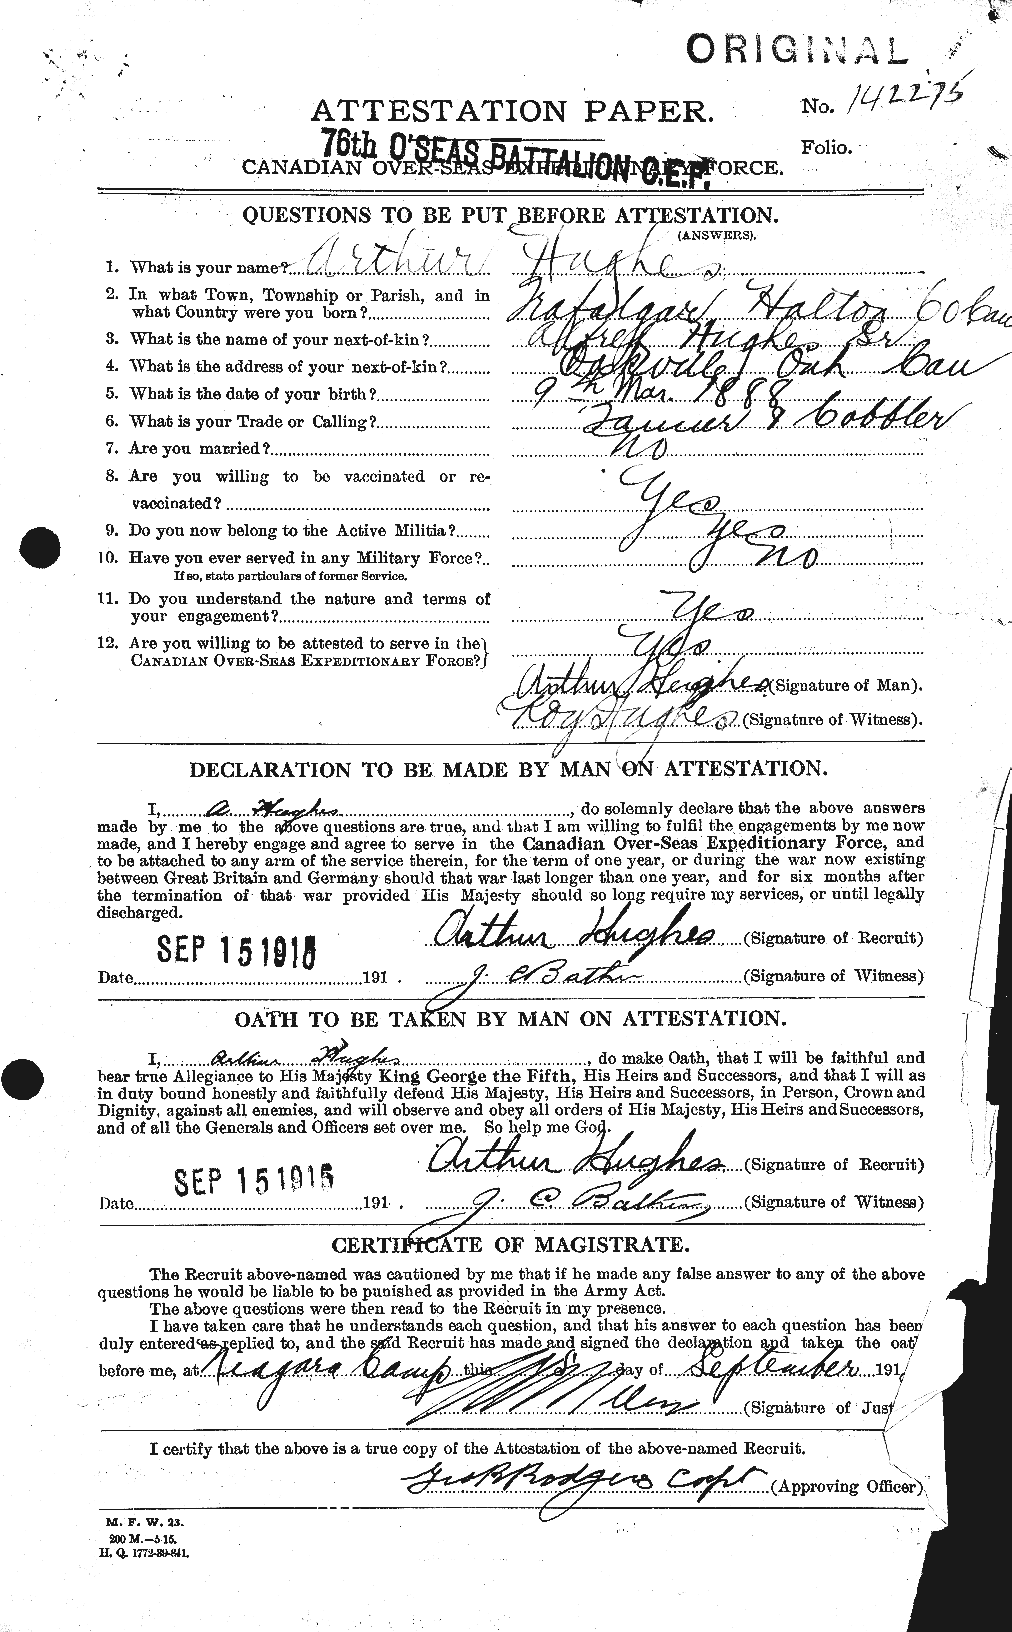 Personnel Records of the First World War - CEF 402560a